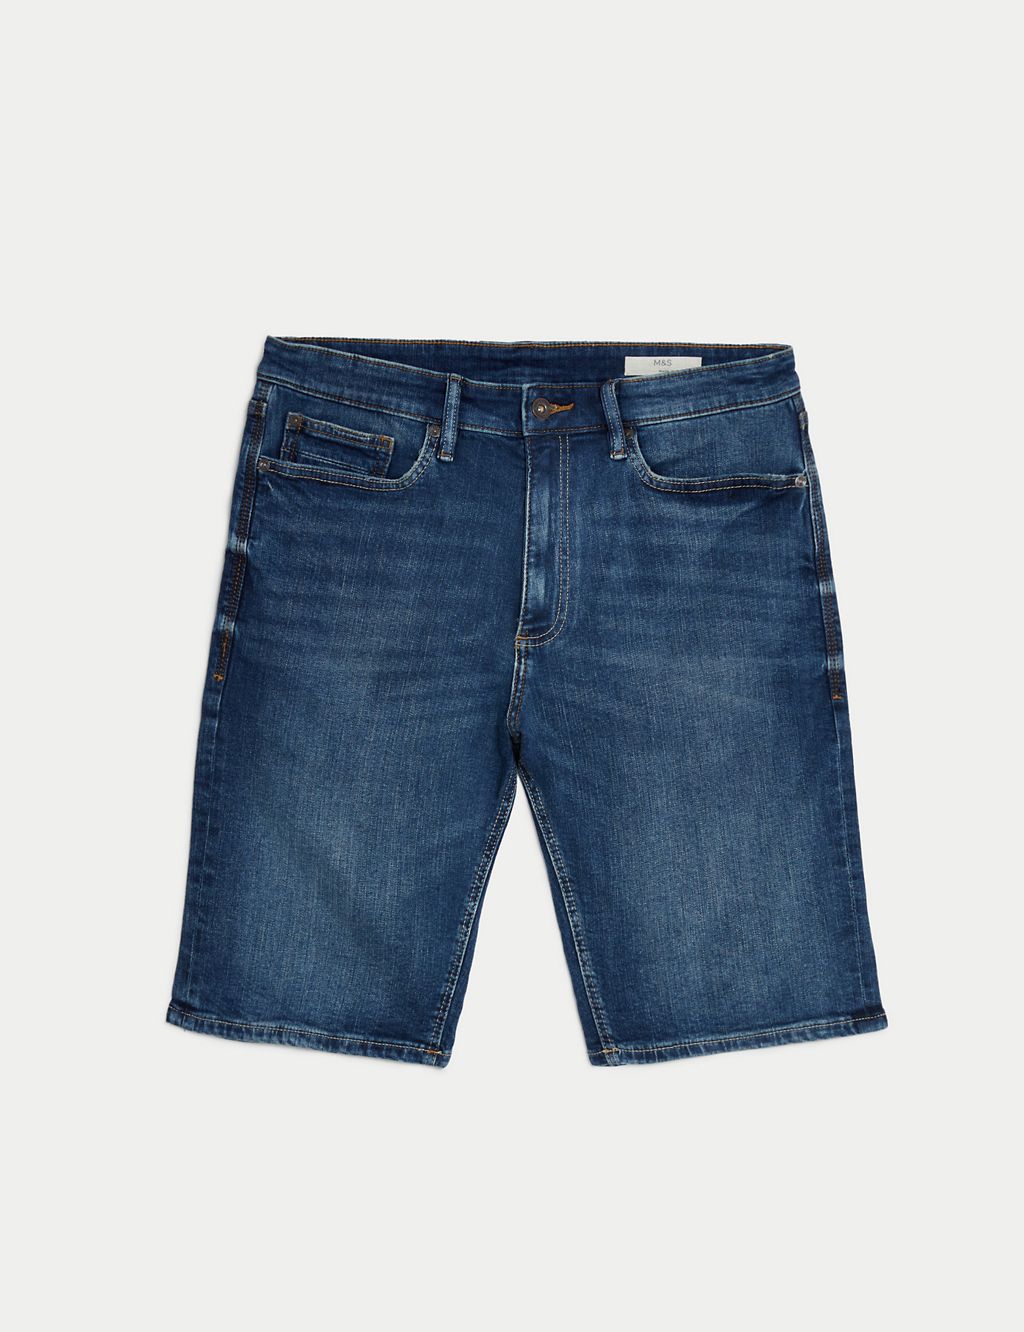 Stretch Denim Shorts | M&S Collection | M&S